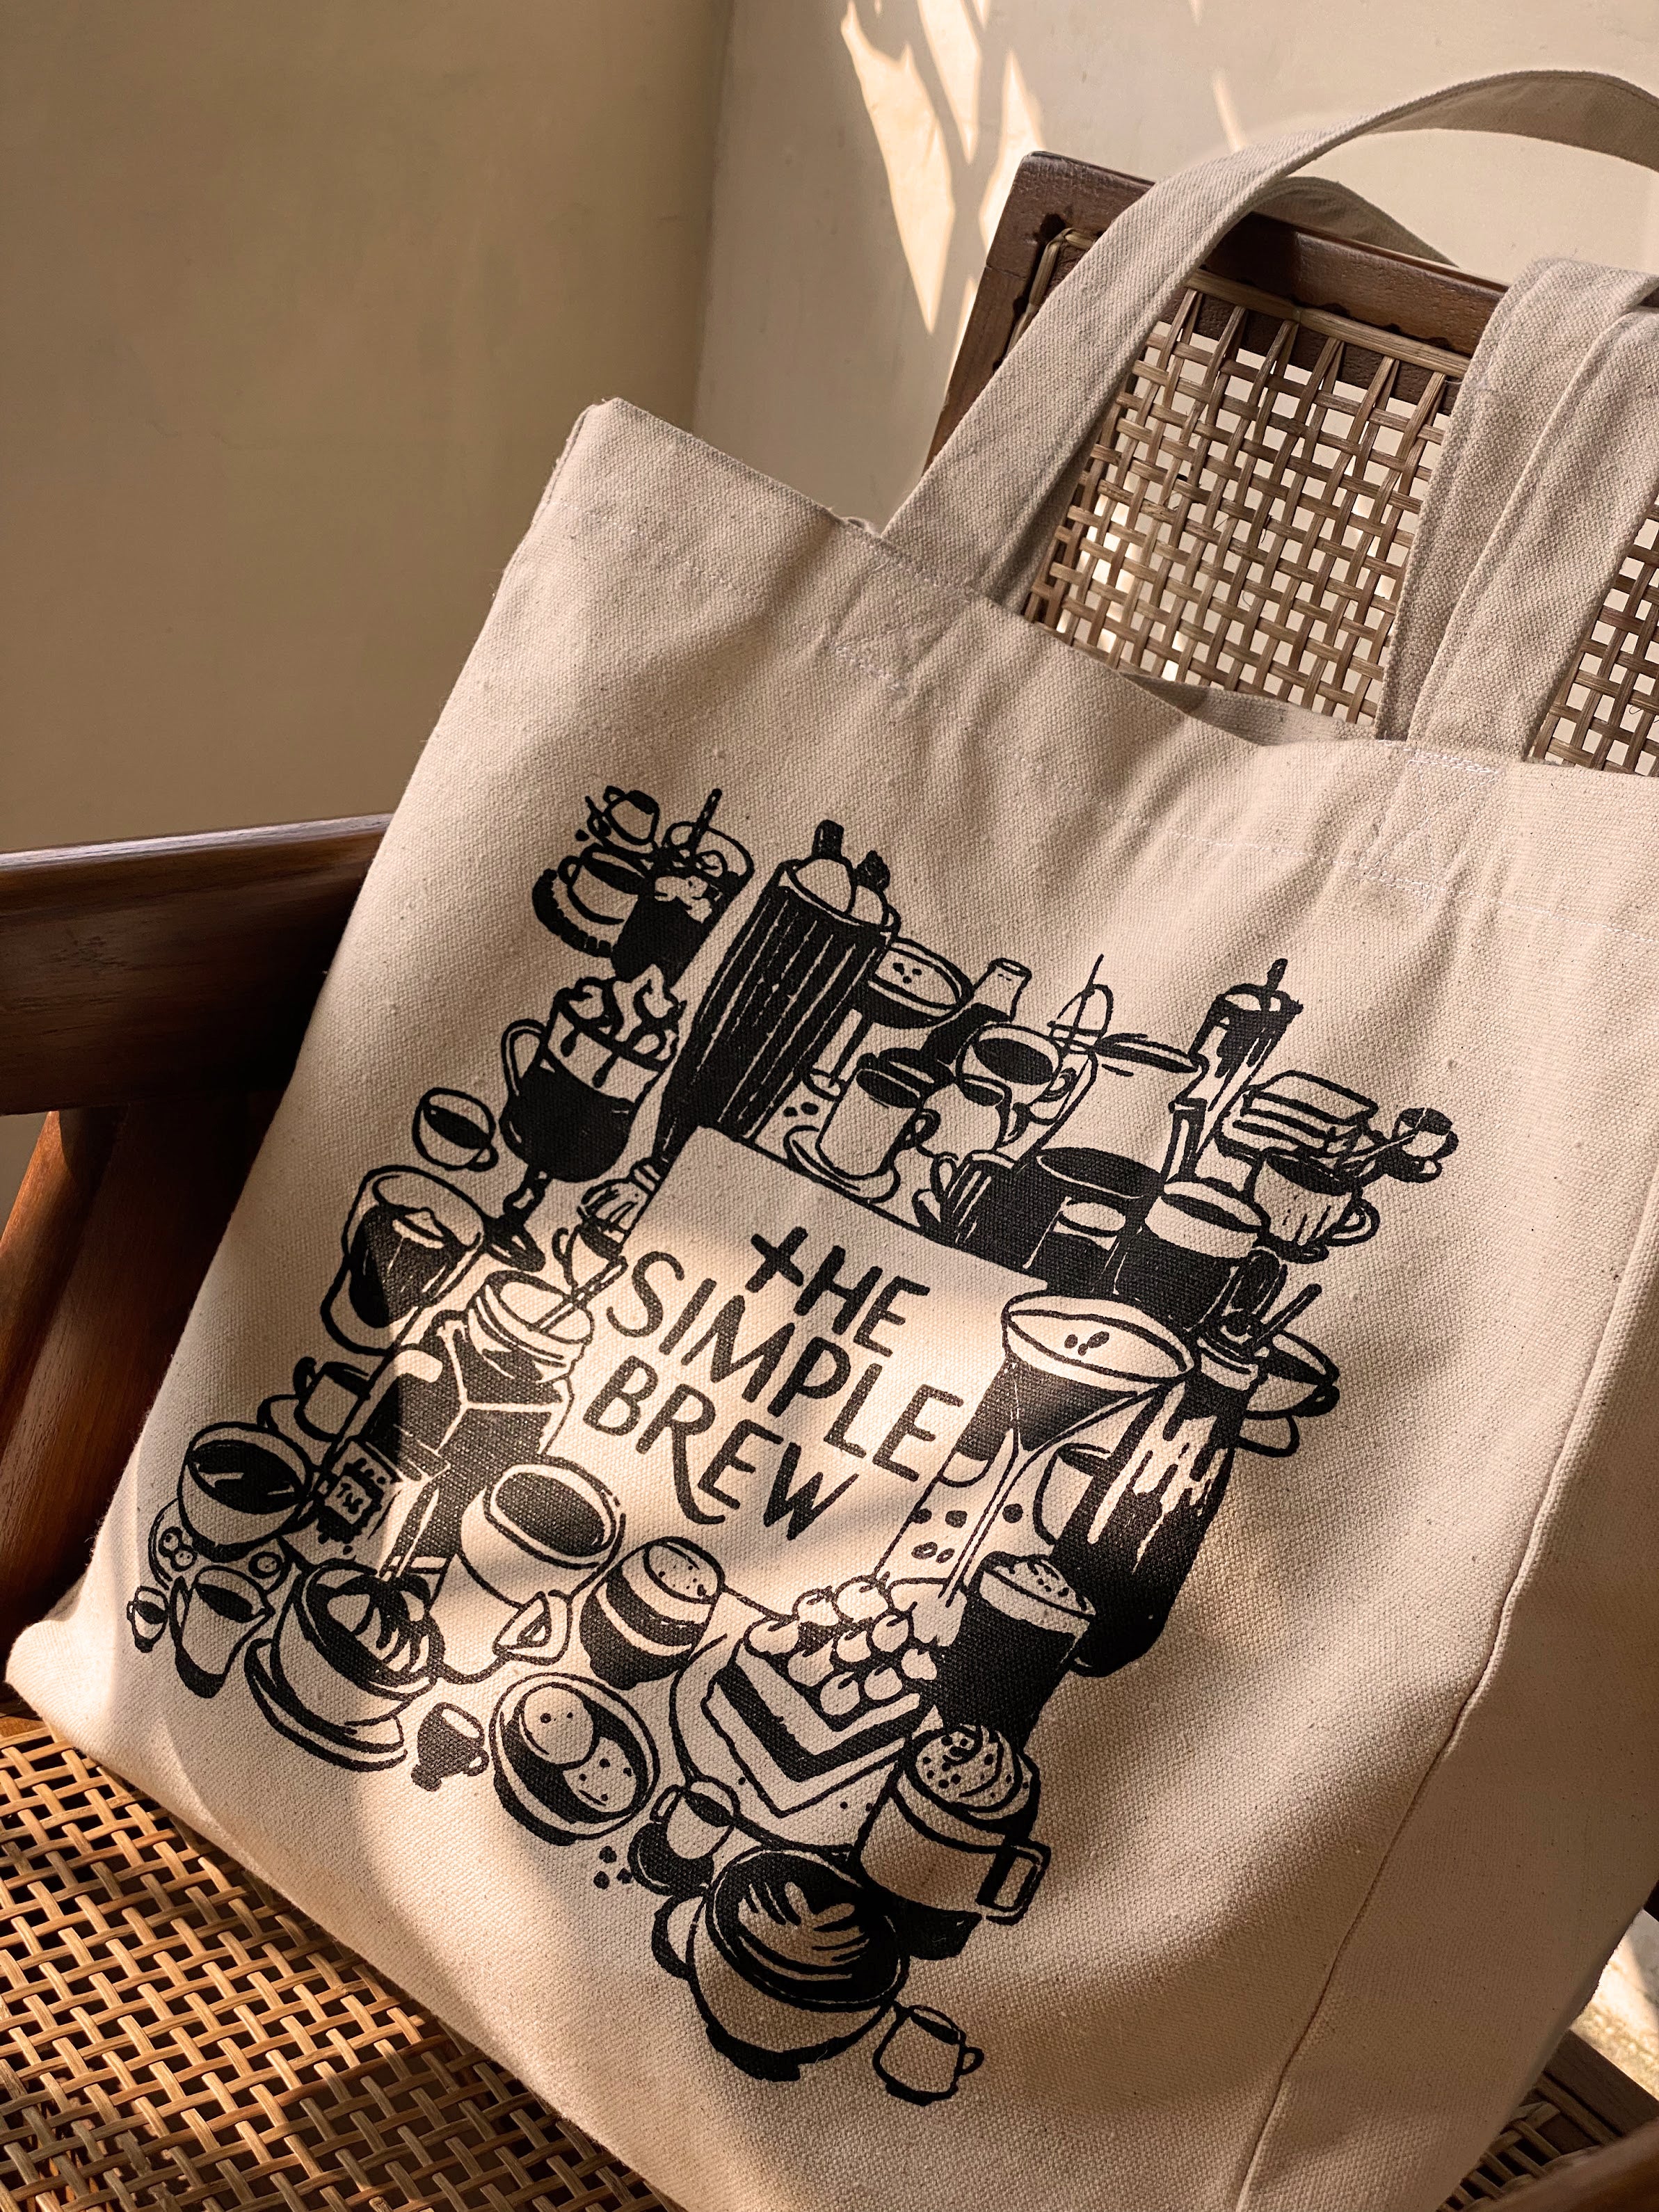 The Simple Tote